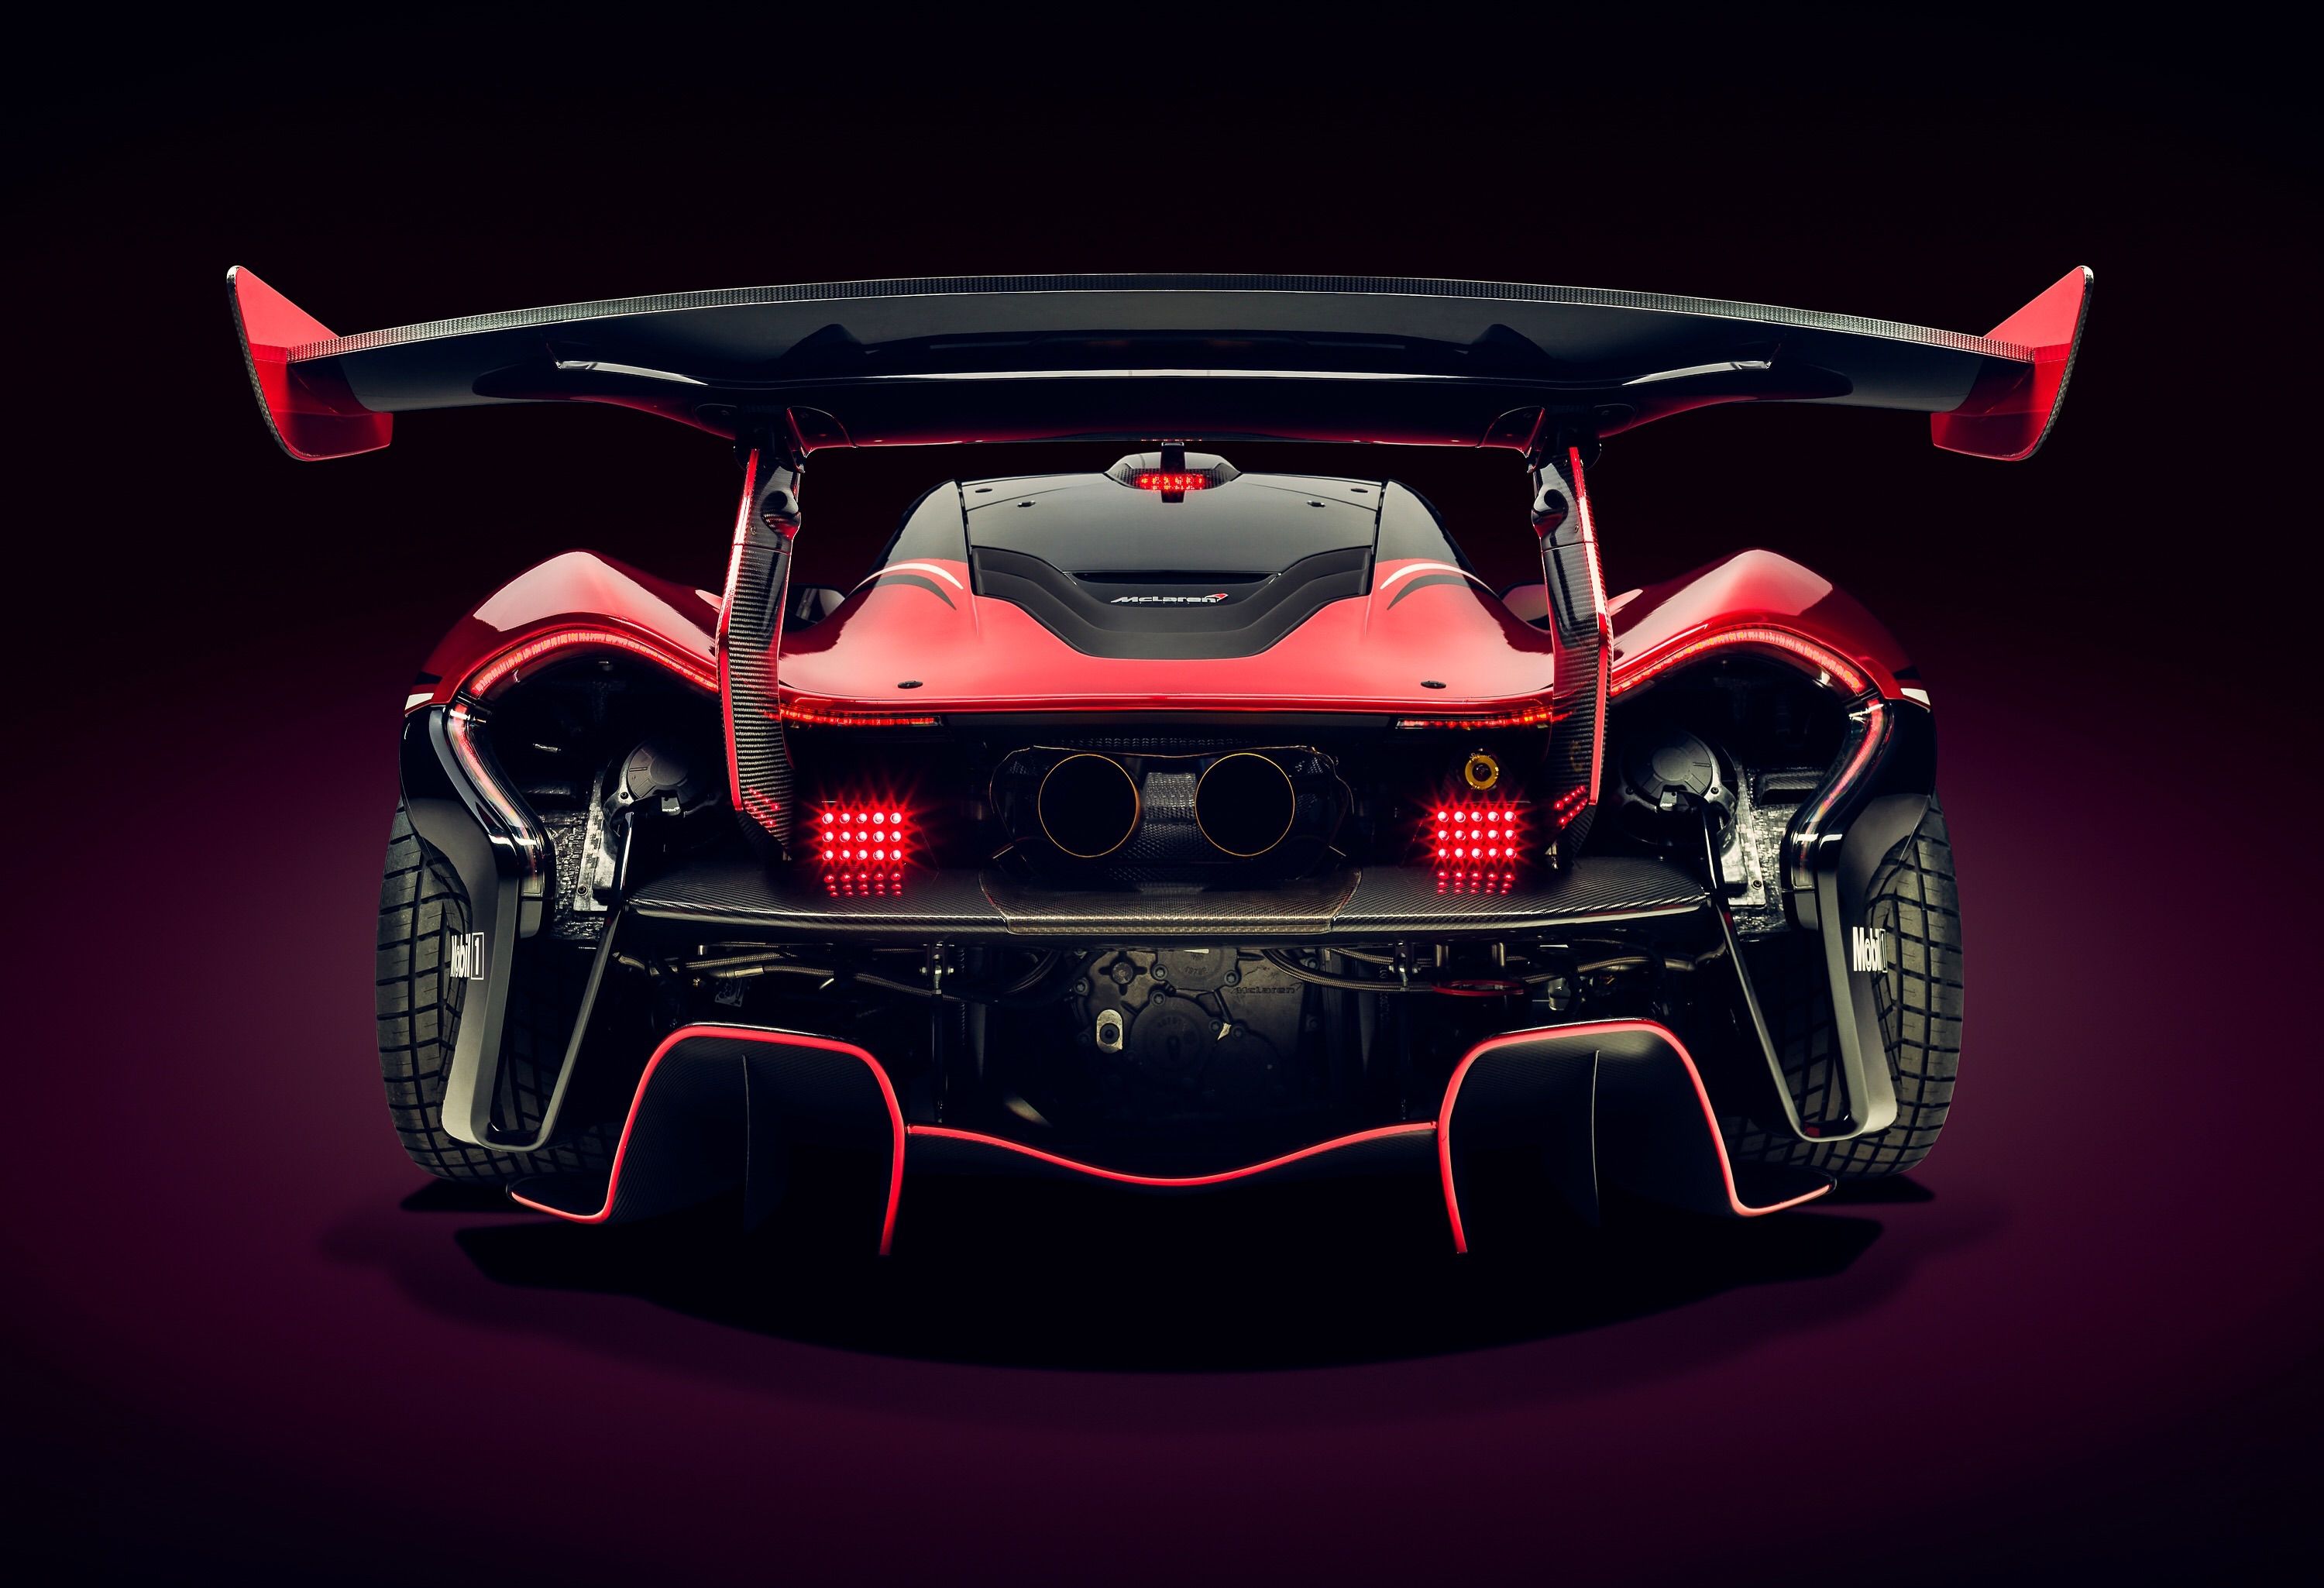 Your ridiculously amazing McLaren P1 GTR wallpaper is here. Color